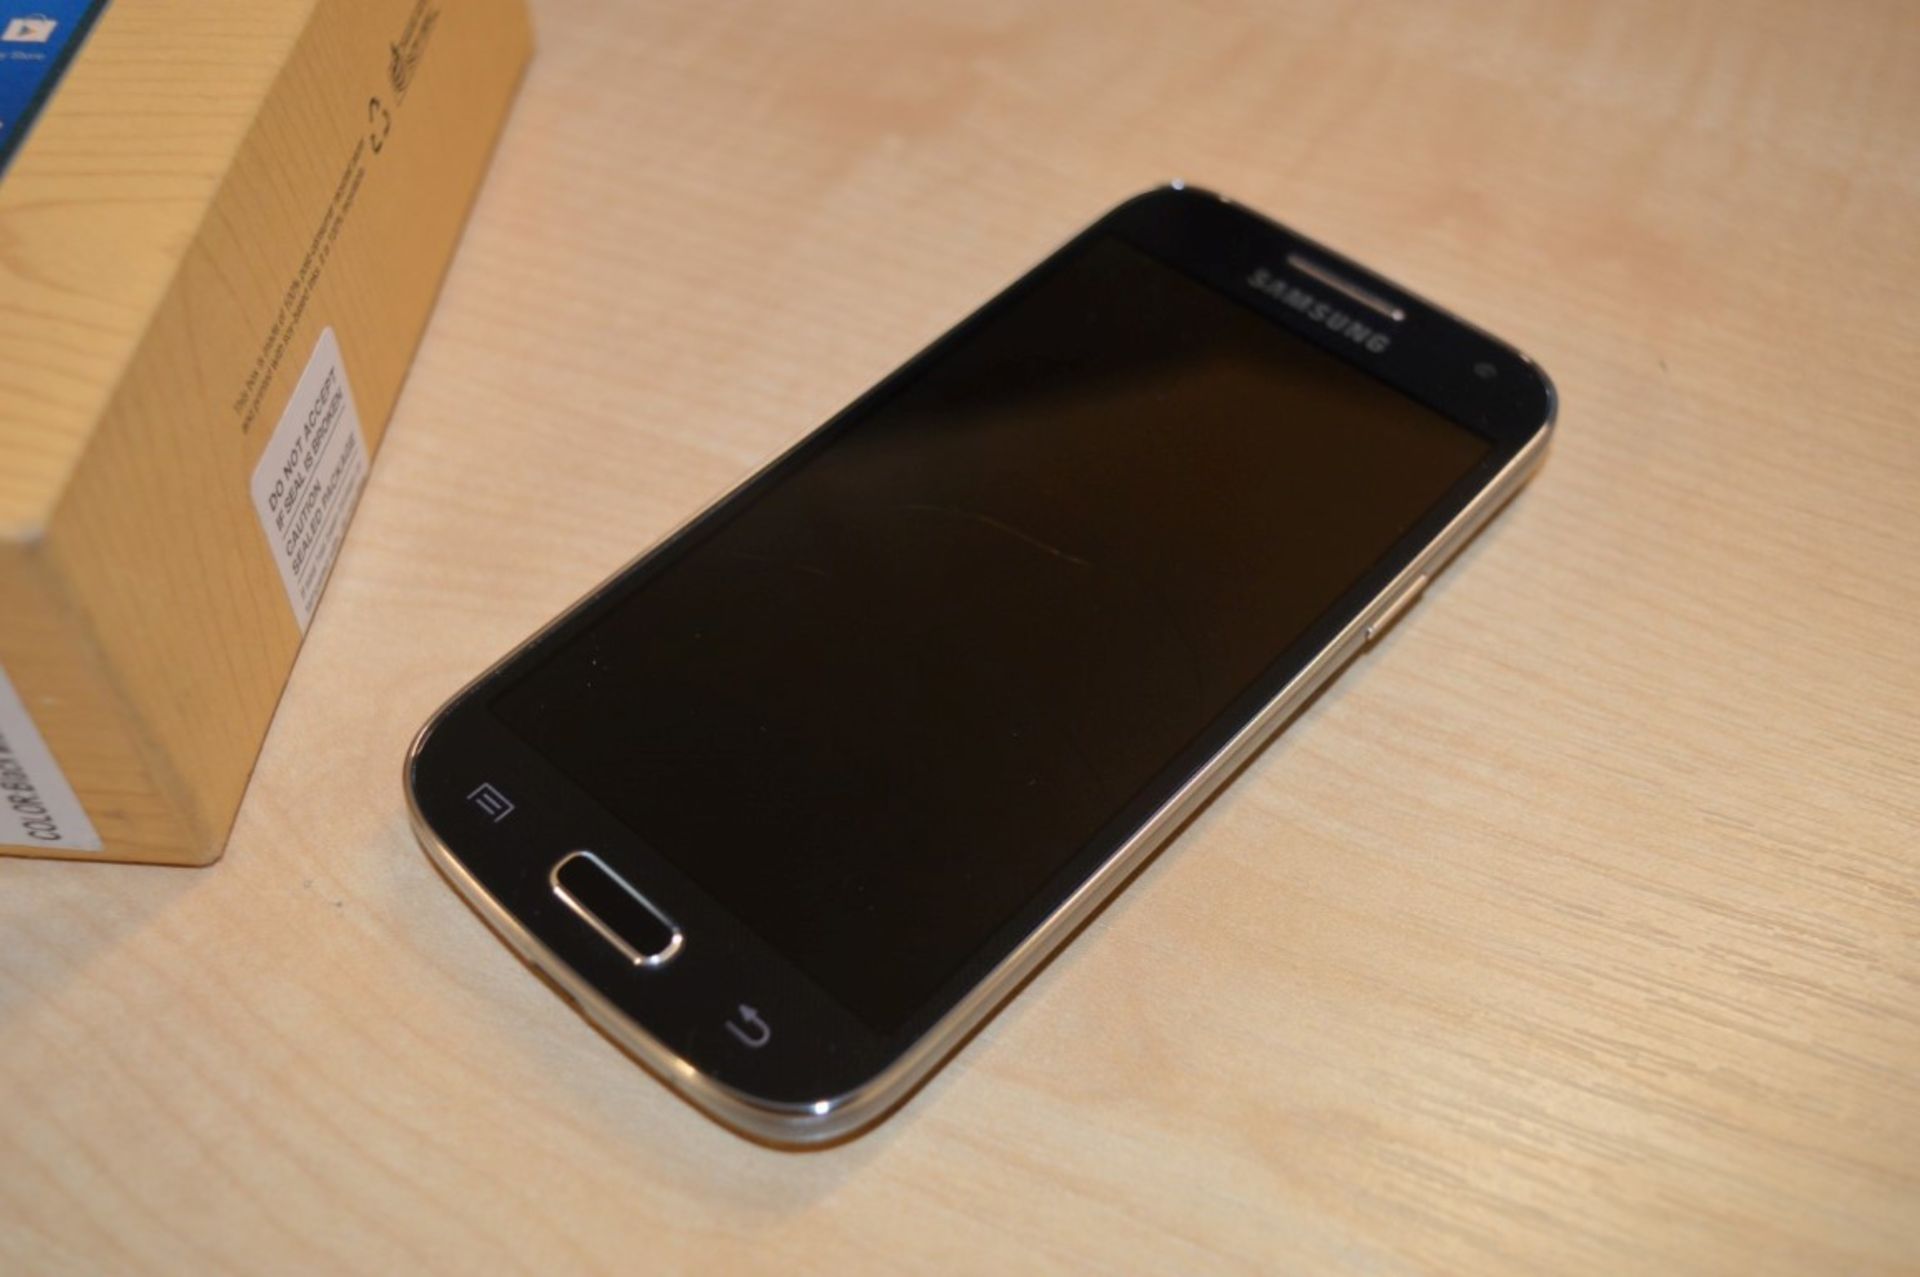 1 x Samsung Galaxy S4 Mini Mobile Phone - Black - GT-19195 - CL300 - Features Dual Core 1.7ghz - Image 2 of 5